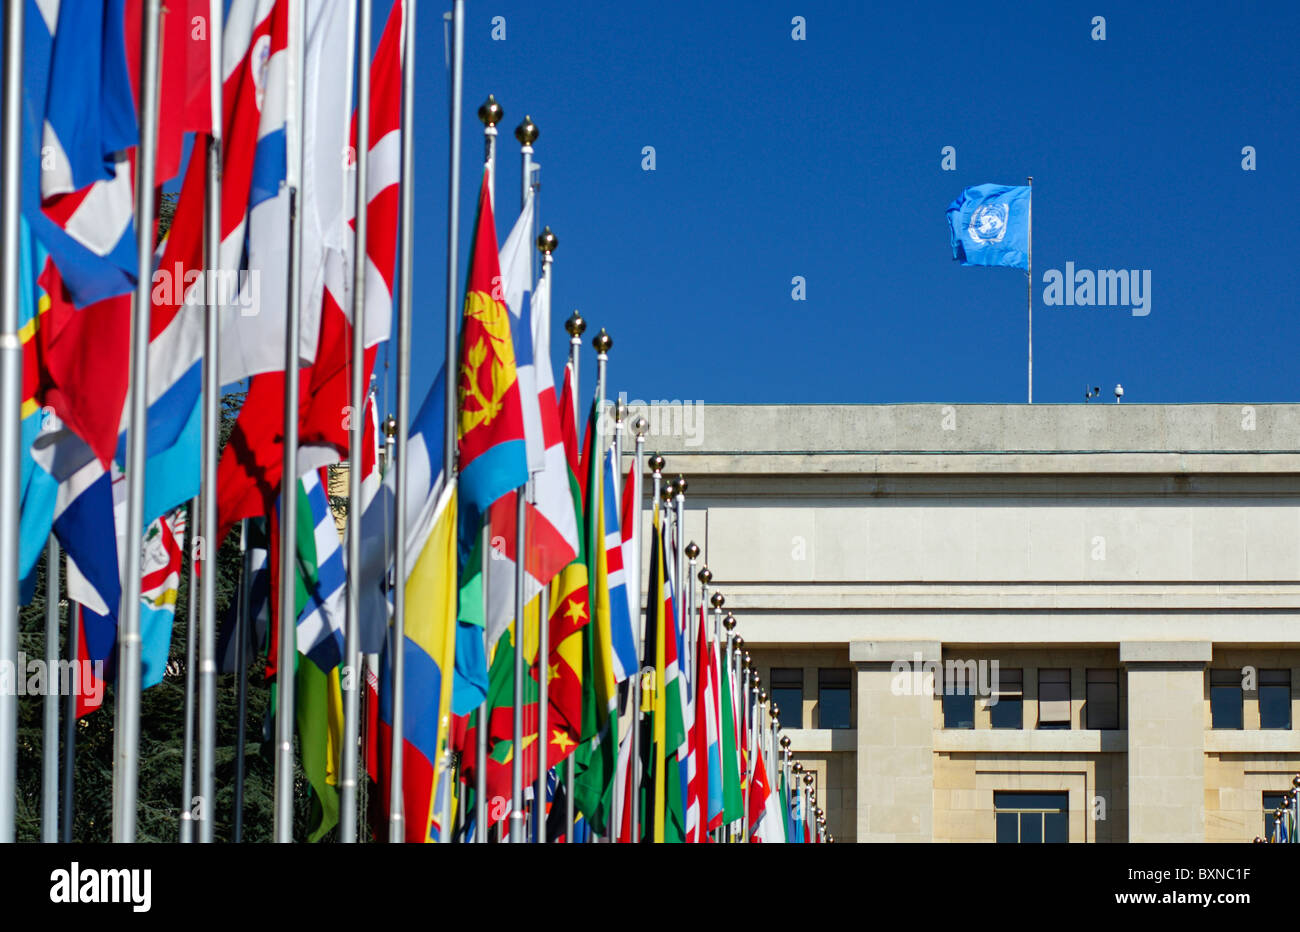 The blue United Nations flag and flags from all countries in the Court of Flags, United Nations,UN, Geneva, Switzerland Stock Photo